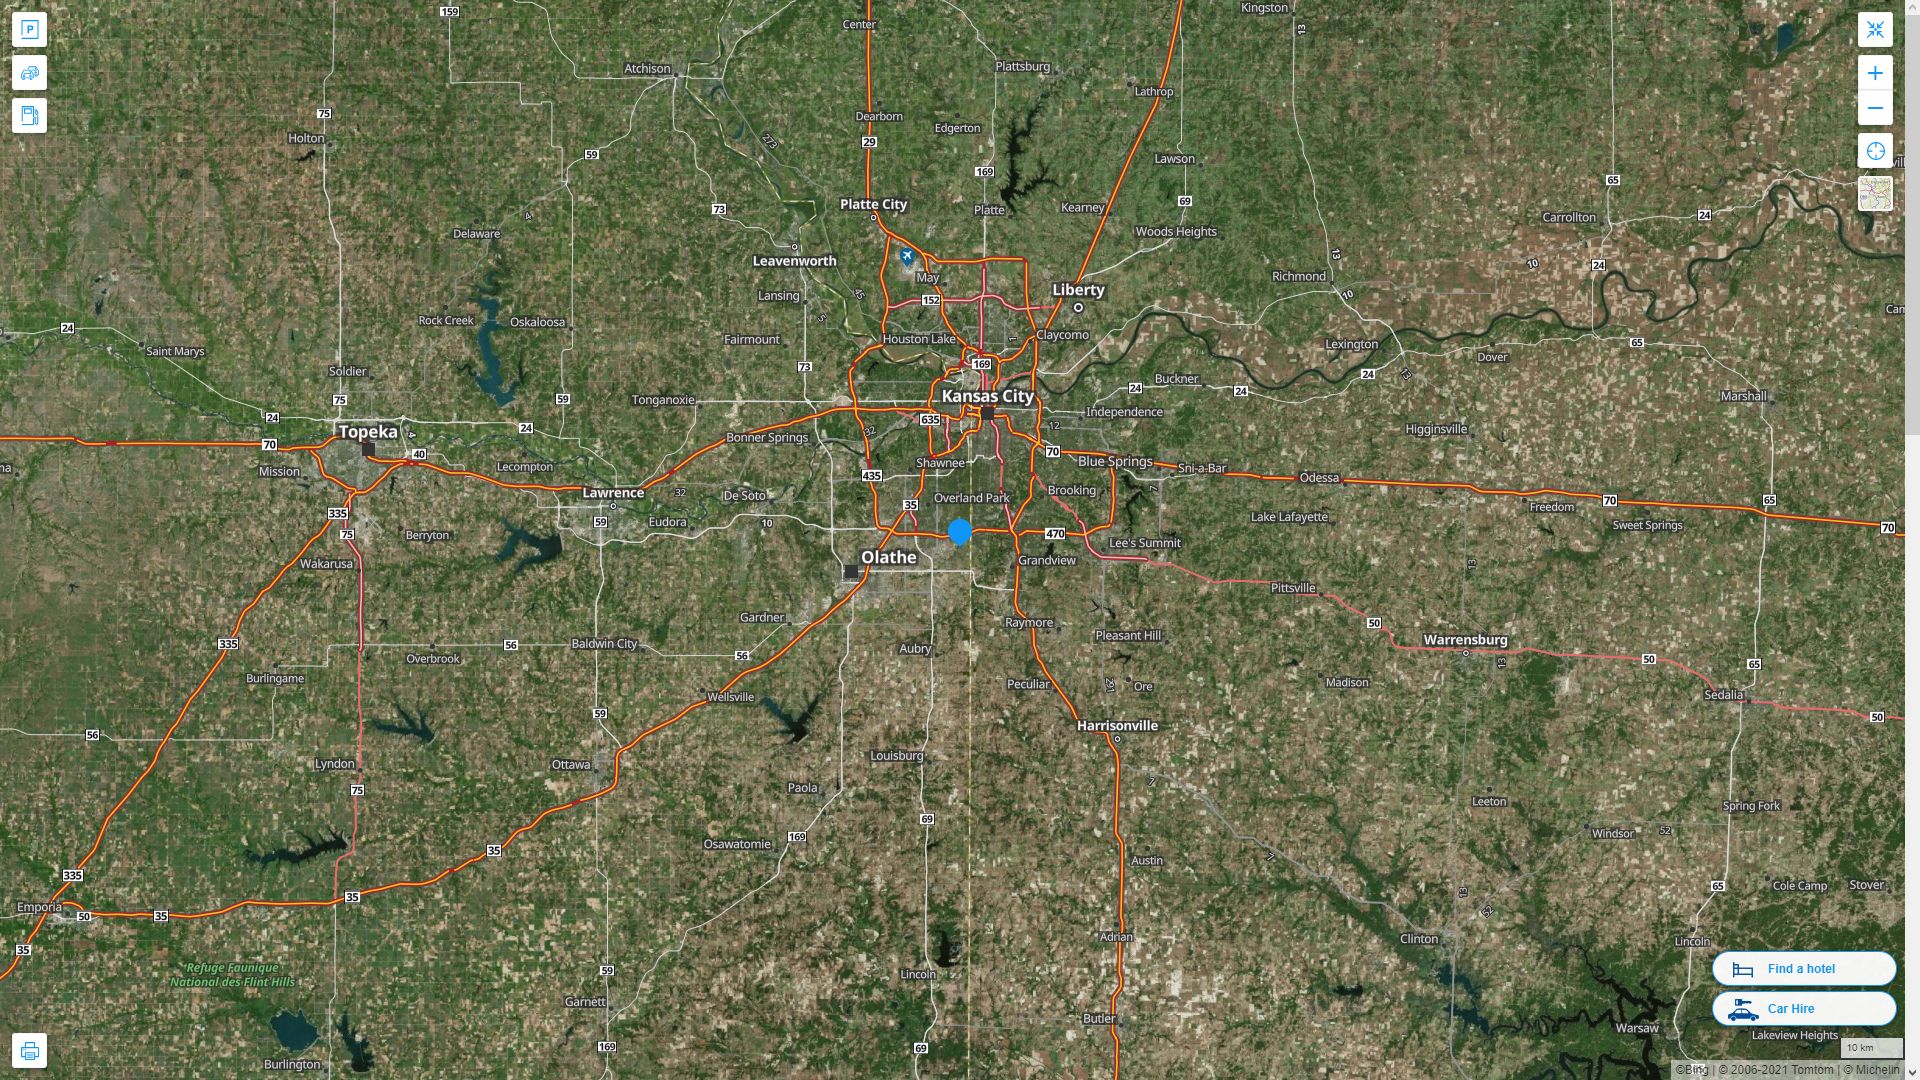 Leawood Kansas Highway and Road Map with Satellite View